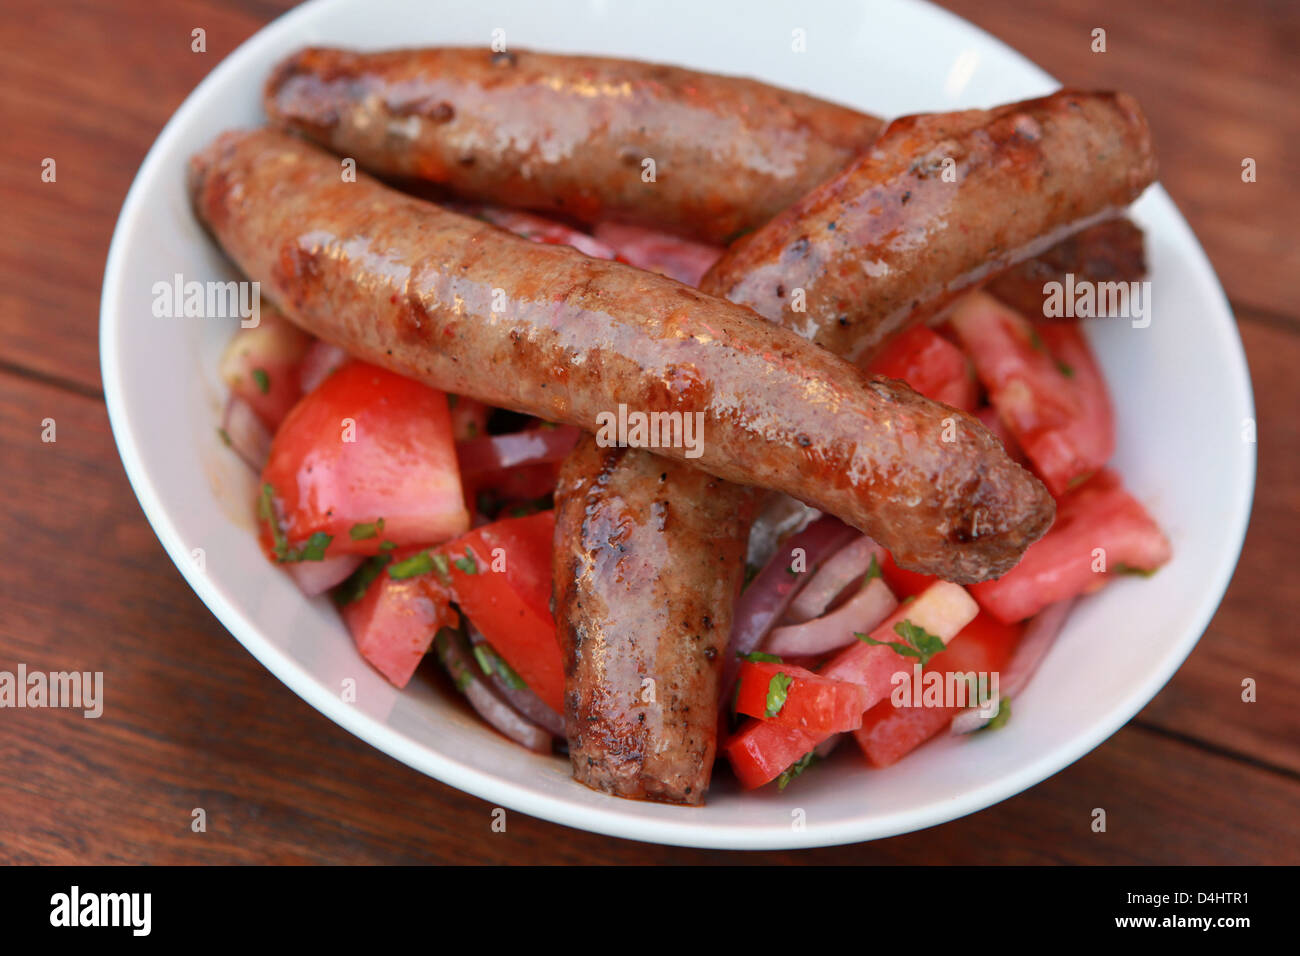 Char Grilled Merguez sausages with salad Stock Photo